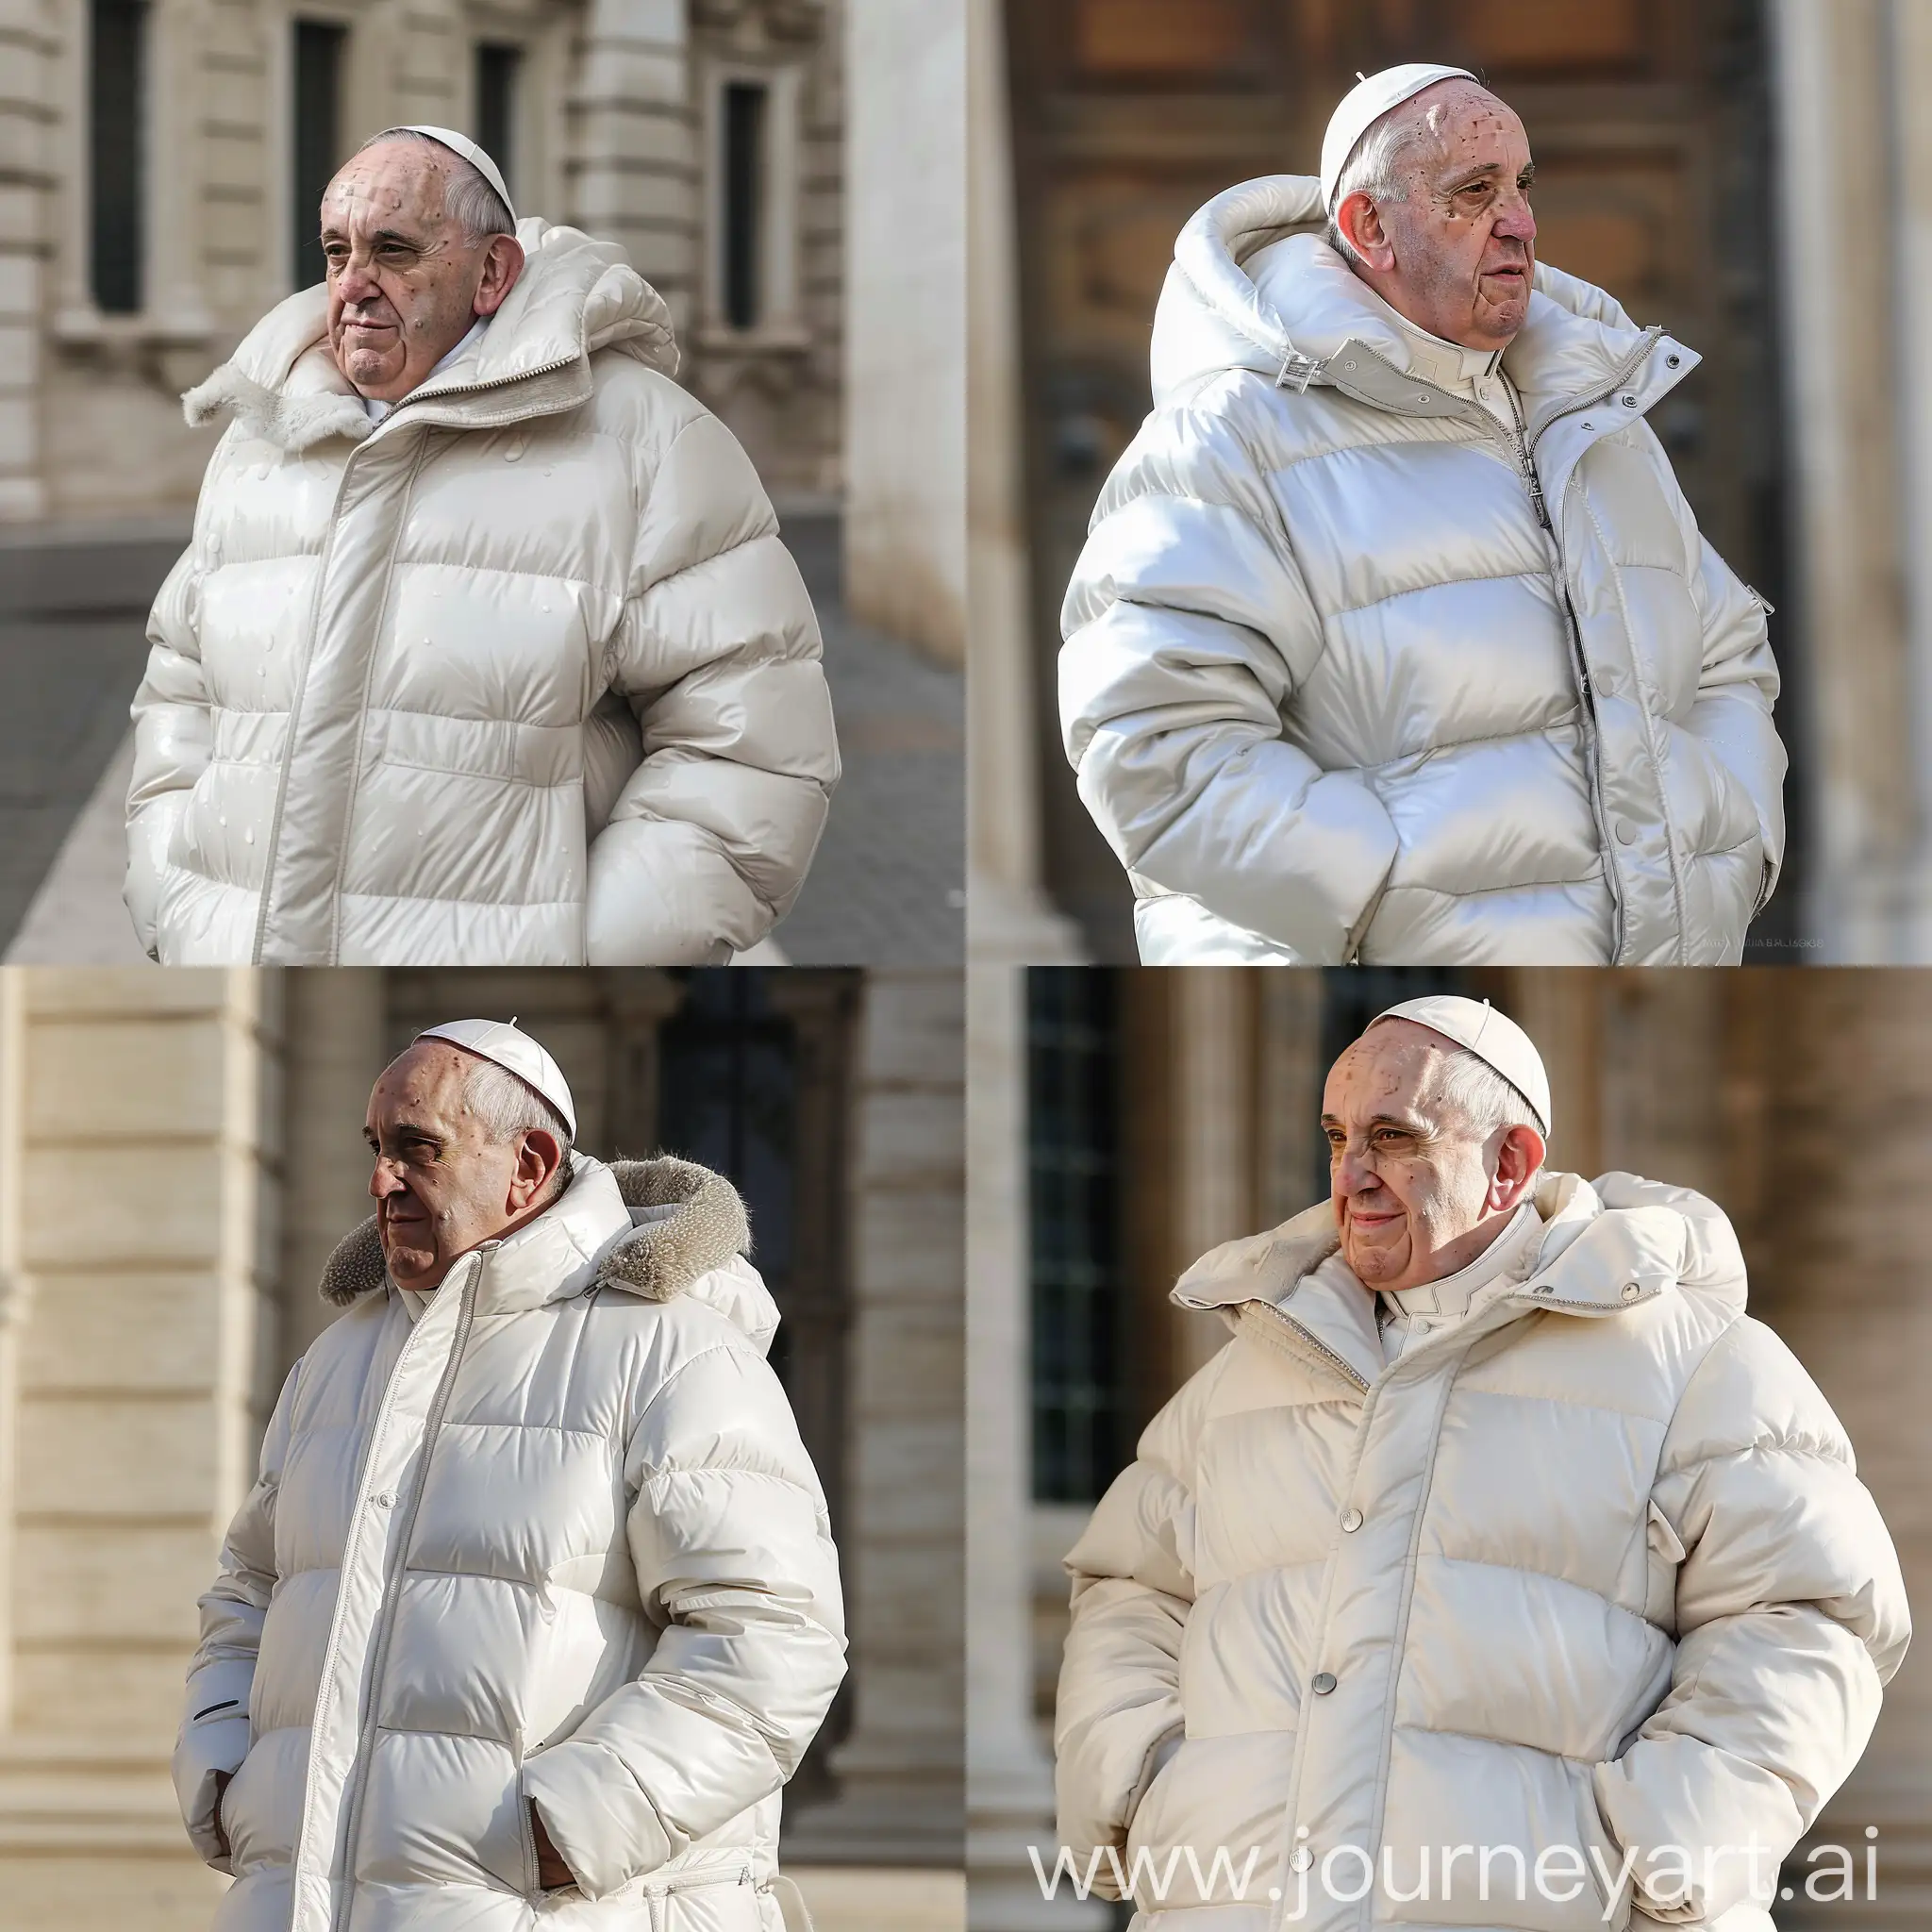 Pope-Francis-in-Balenciaga-Puffer-Jacket-Daytime-Side-Angle-Portrait-with-Immaculate-Appearance